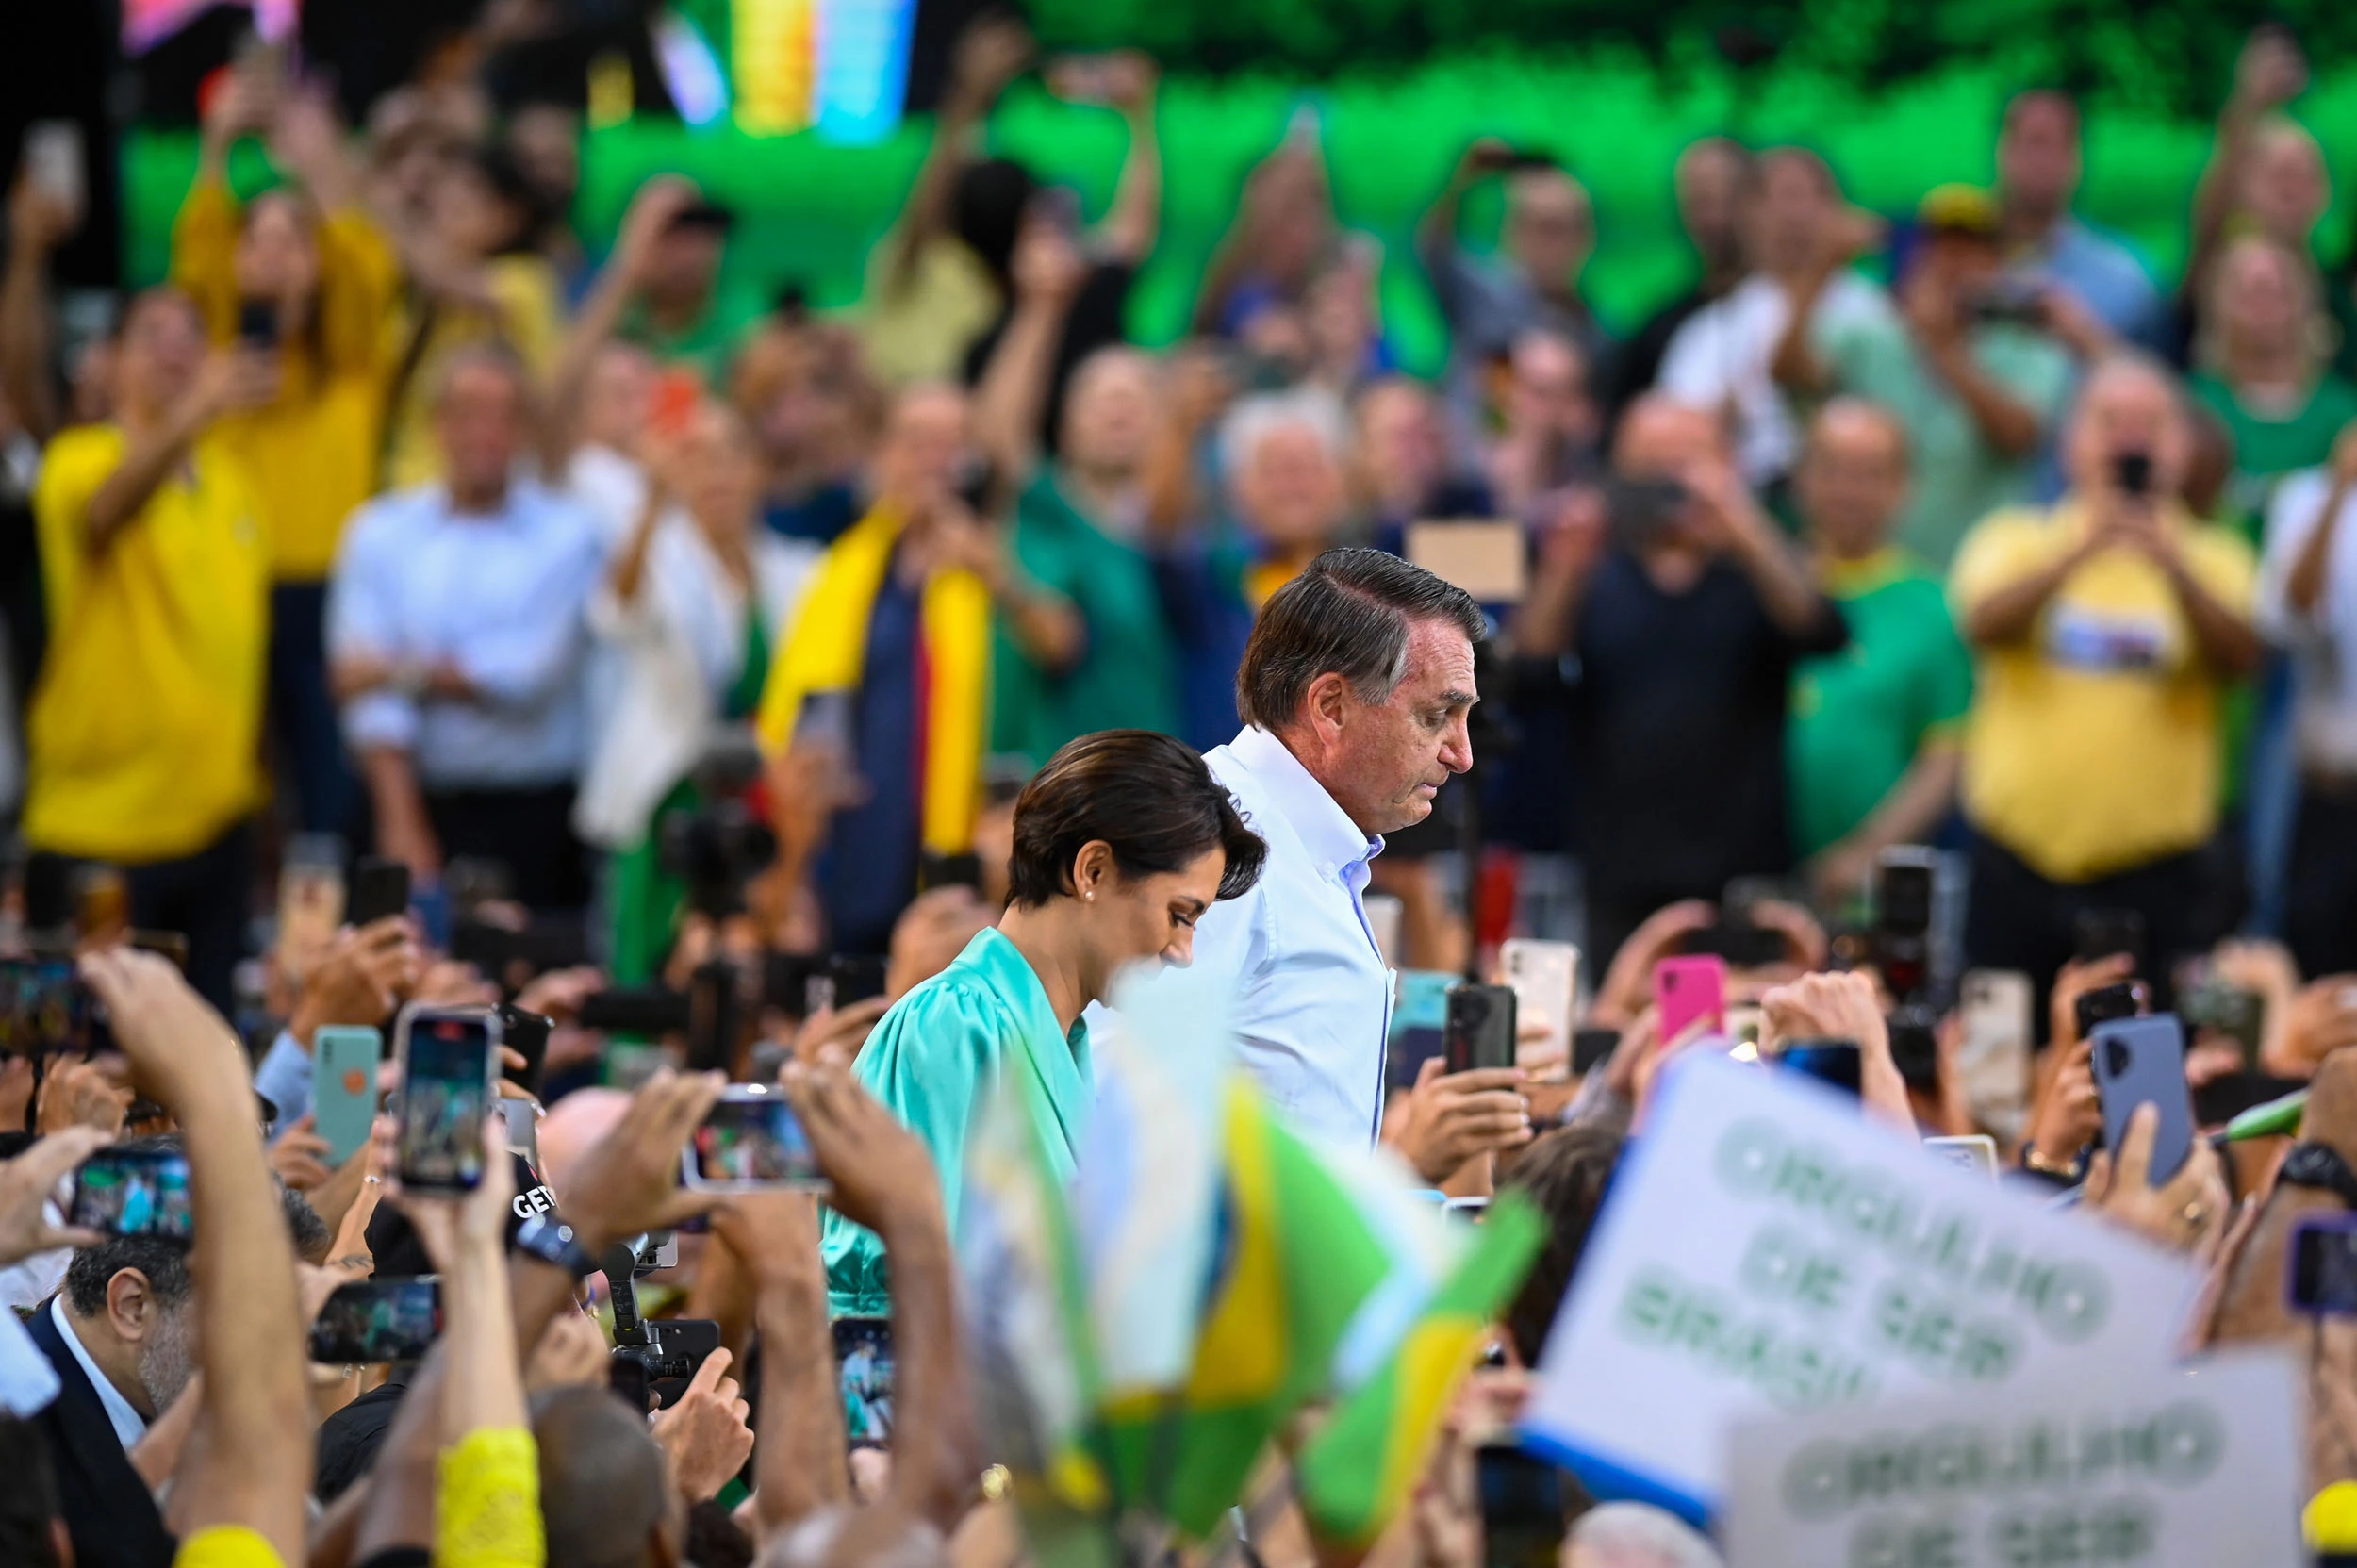 Jair Bolsonaro, Brazil's president, center, and First Lady Michele Bolsonaro attend the National Convention to formalize his candidacy for a second term, at Maracanazinho Gymnasium in Rio de Janeiro, Brazil, on Sunday, July 24, 2022. Bolsonaro officially kicked off his re-election campaign on Sunday, rallying thousands of his followers to Rio de Janeiro, after intensifying his attempts to discredit Brazil's voting system. Photographer: Andre Borges/Bloomberg via Getty Images